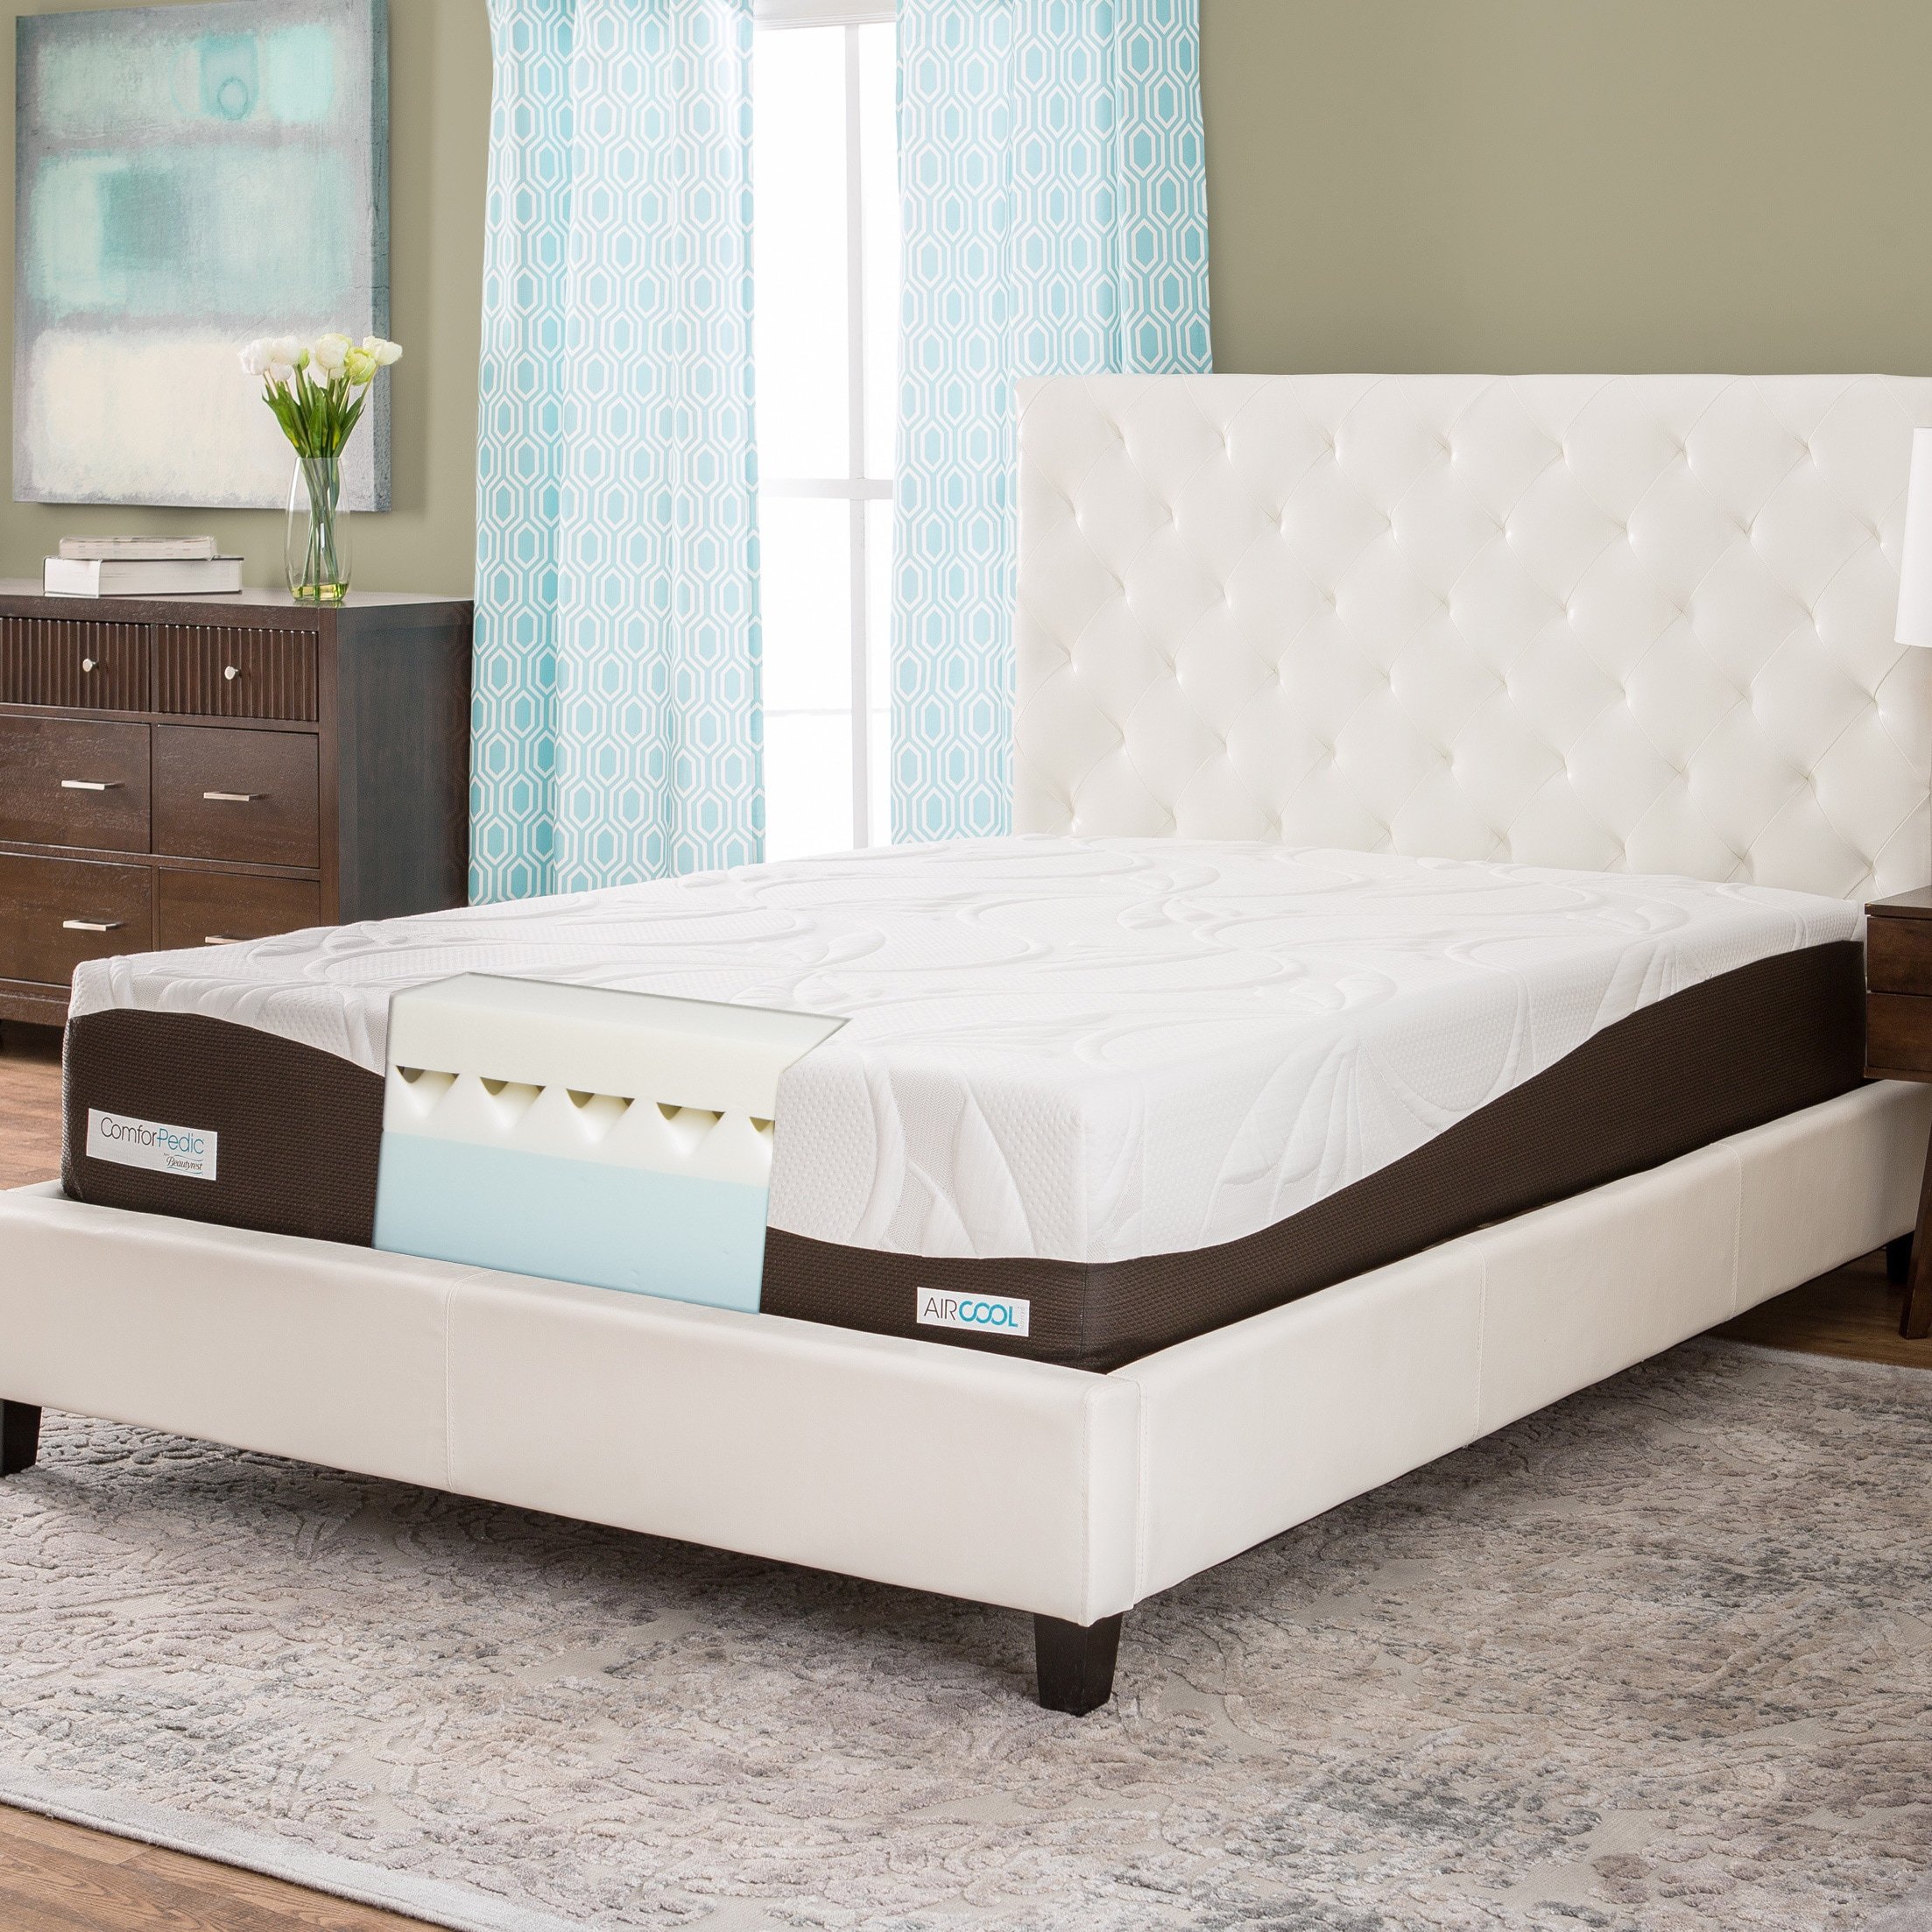 Simmons Beautyrest ComforPedic from Beautyrest 12